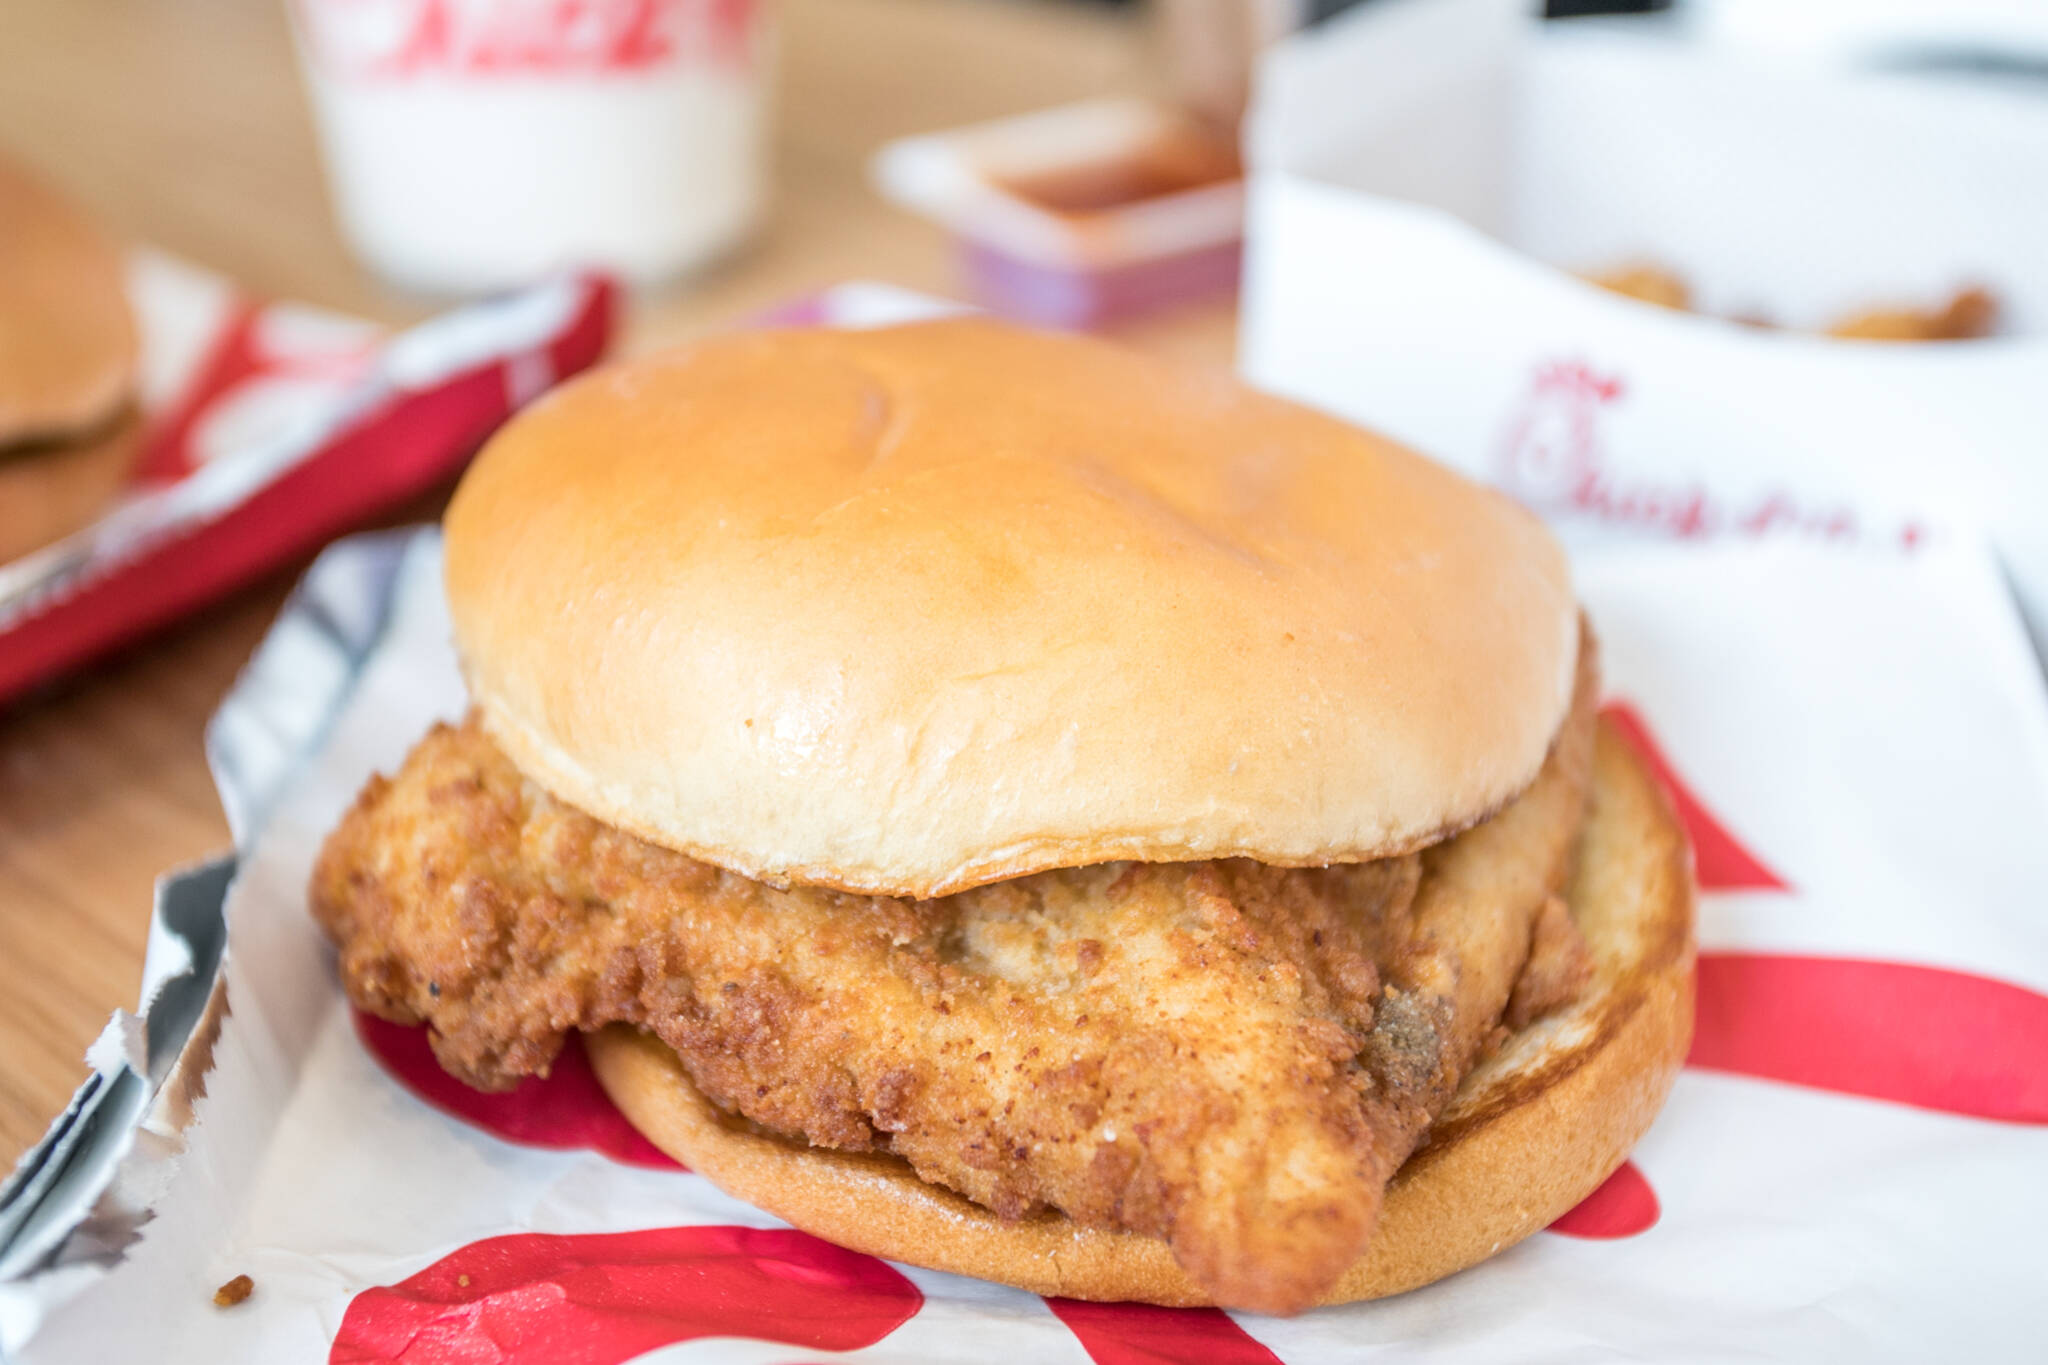 Toronto is about to get a whole lot more ChickfilA locations